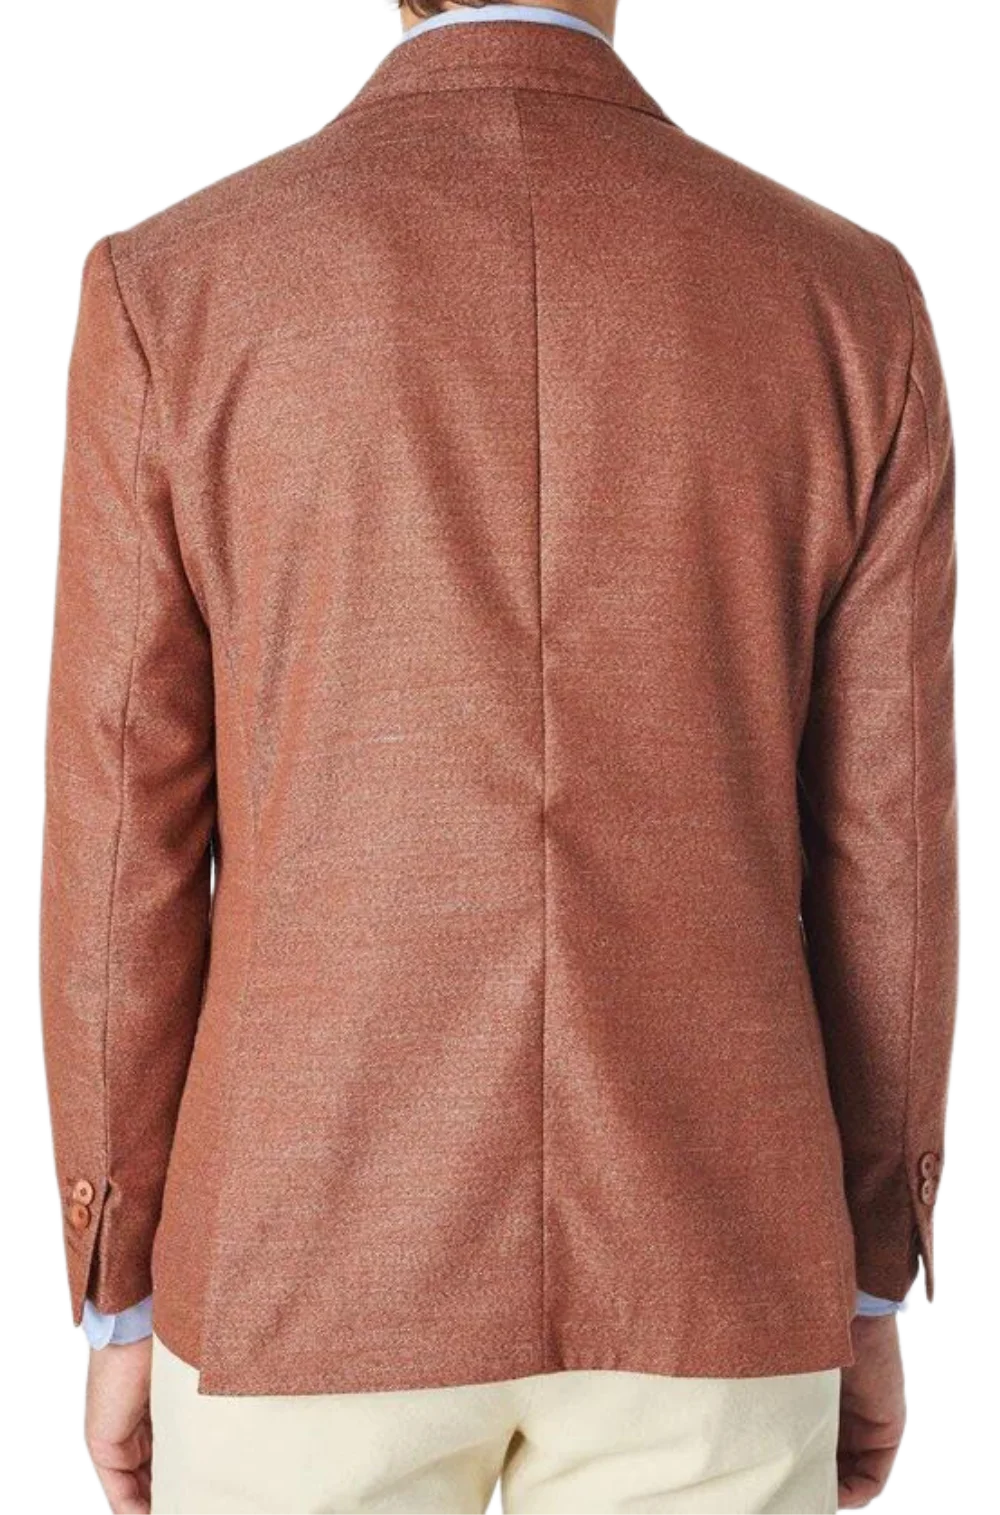 Men's Fusaro Austine Melange Wool Blend Jacket in Rust (21089) - available in-store, 337 Monty Naicker Street, Durban CBD or online at Omar's Tailors & Outfitters online store.   A men's fashion curation for South African men - established in 1911.